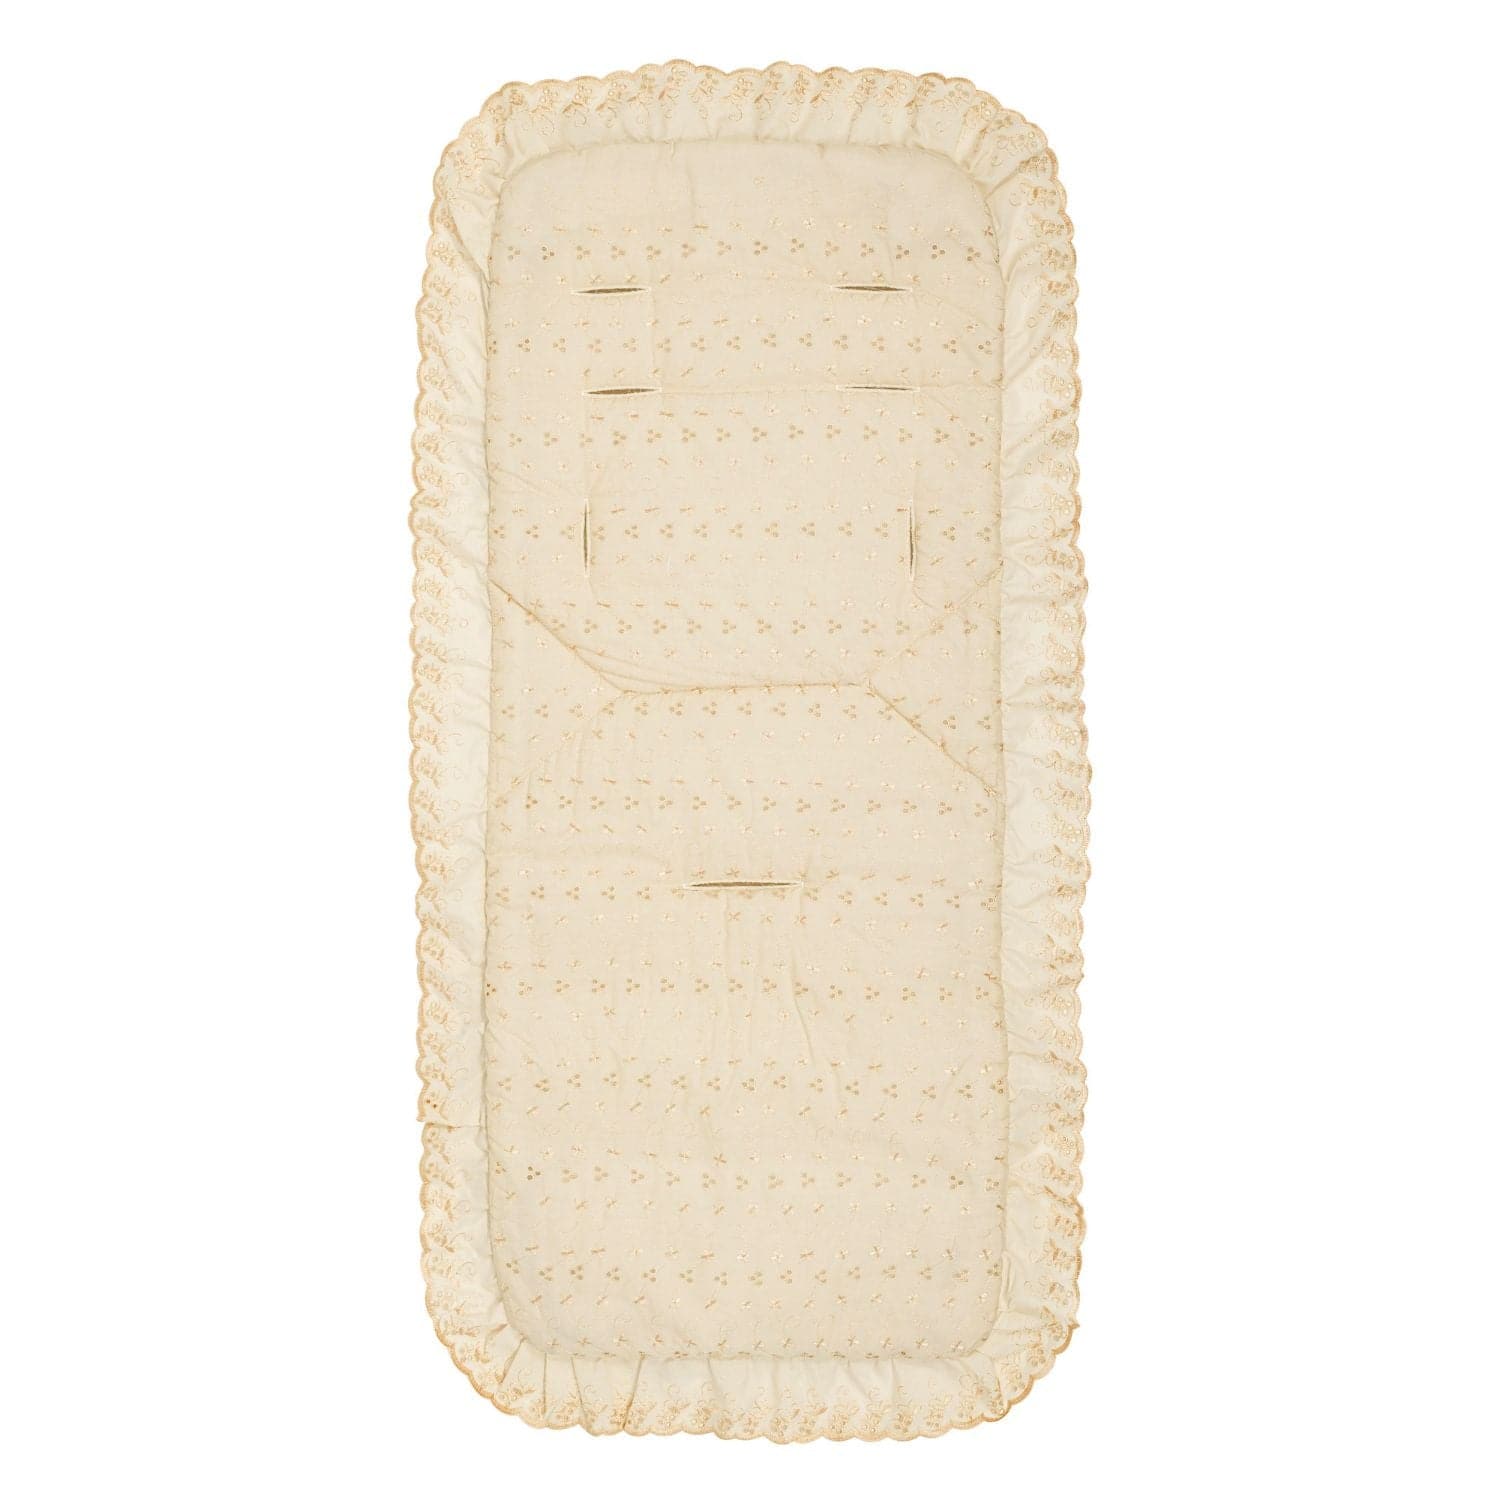 Broderie Anglaise Pushchair Seat Liner Compatible with iCandy - Fits All Models - For Your Little One